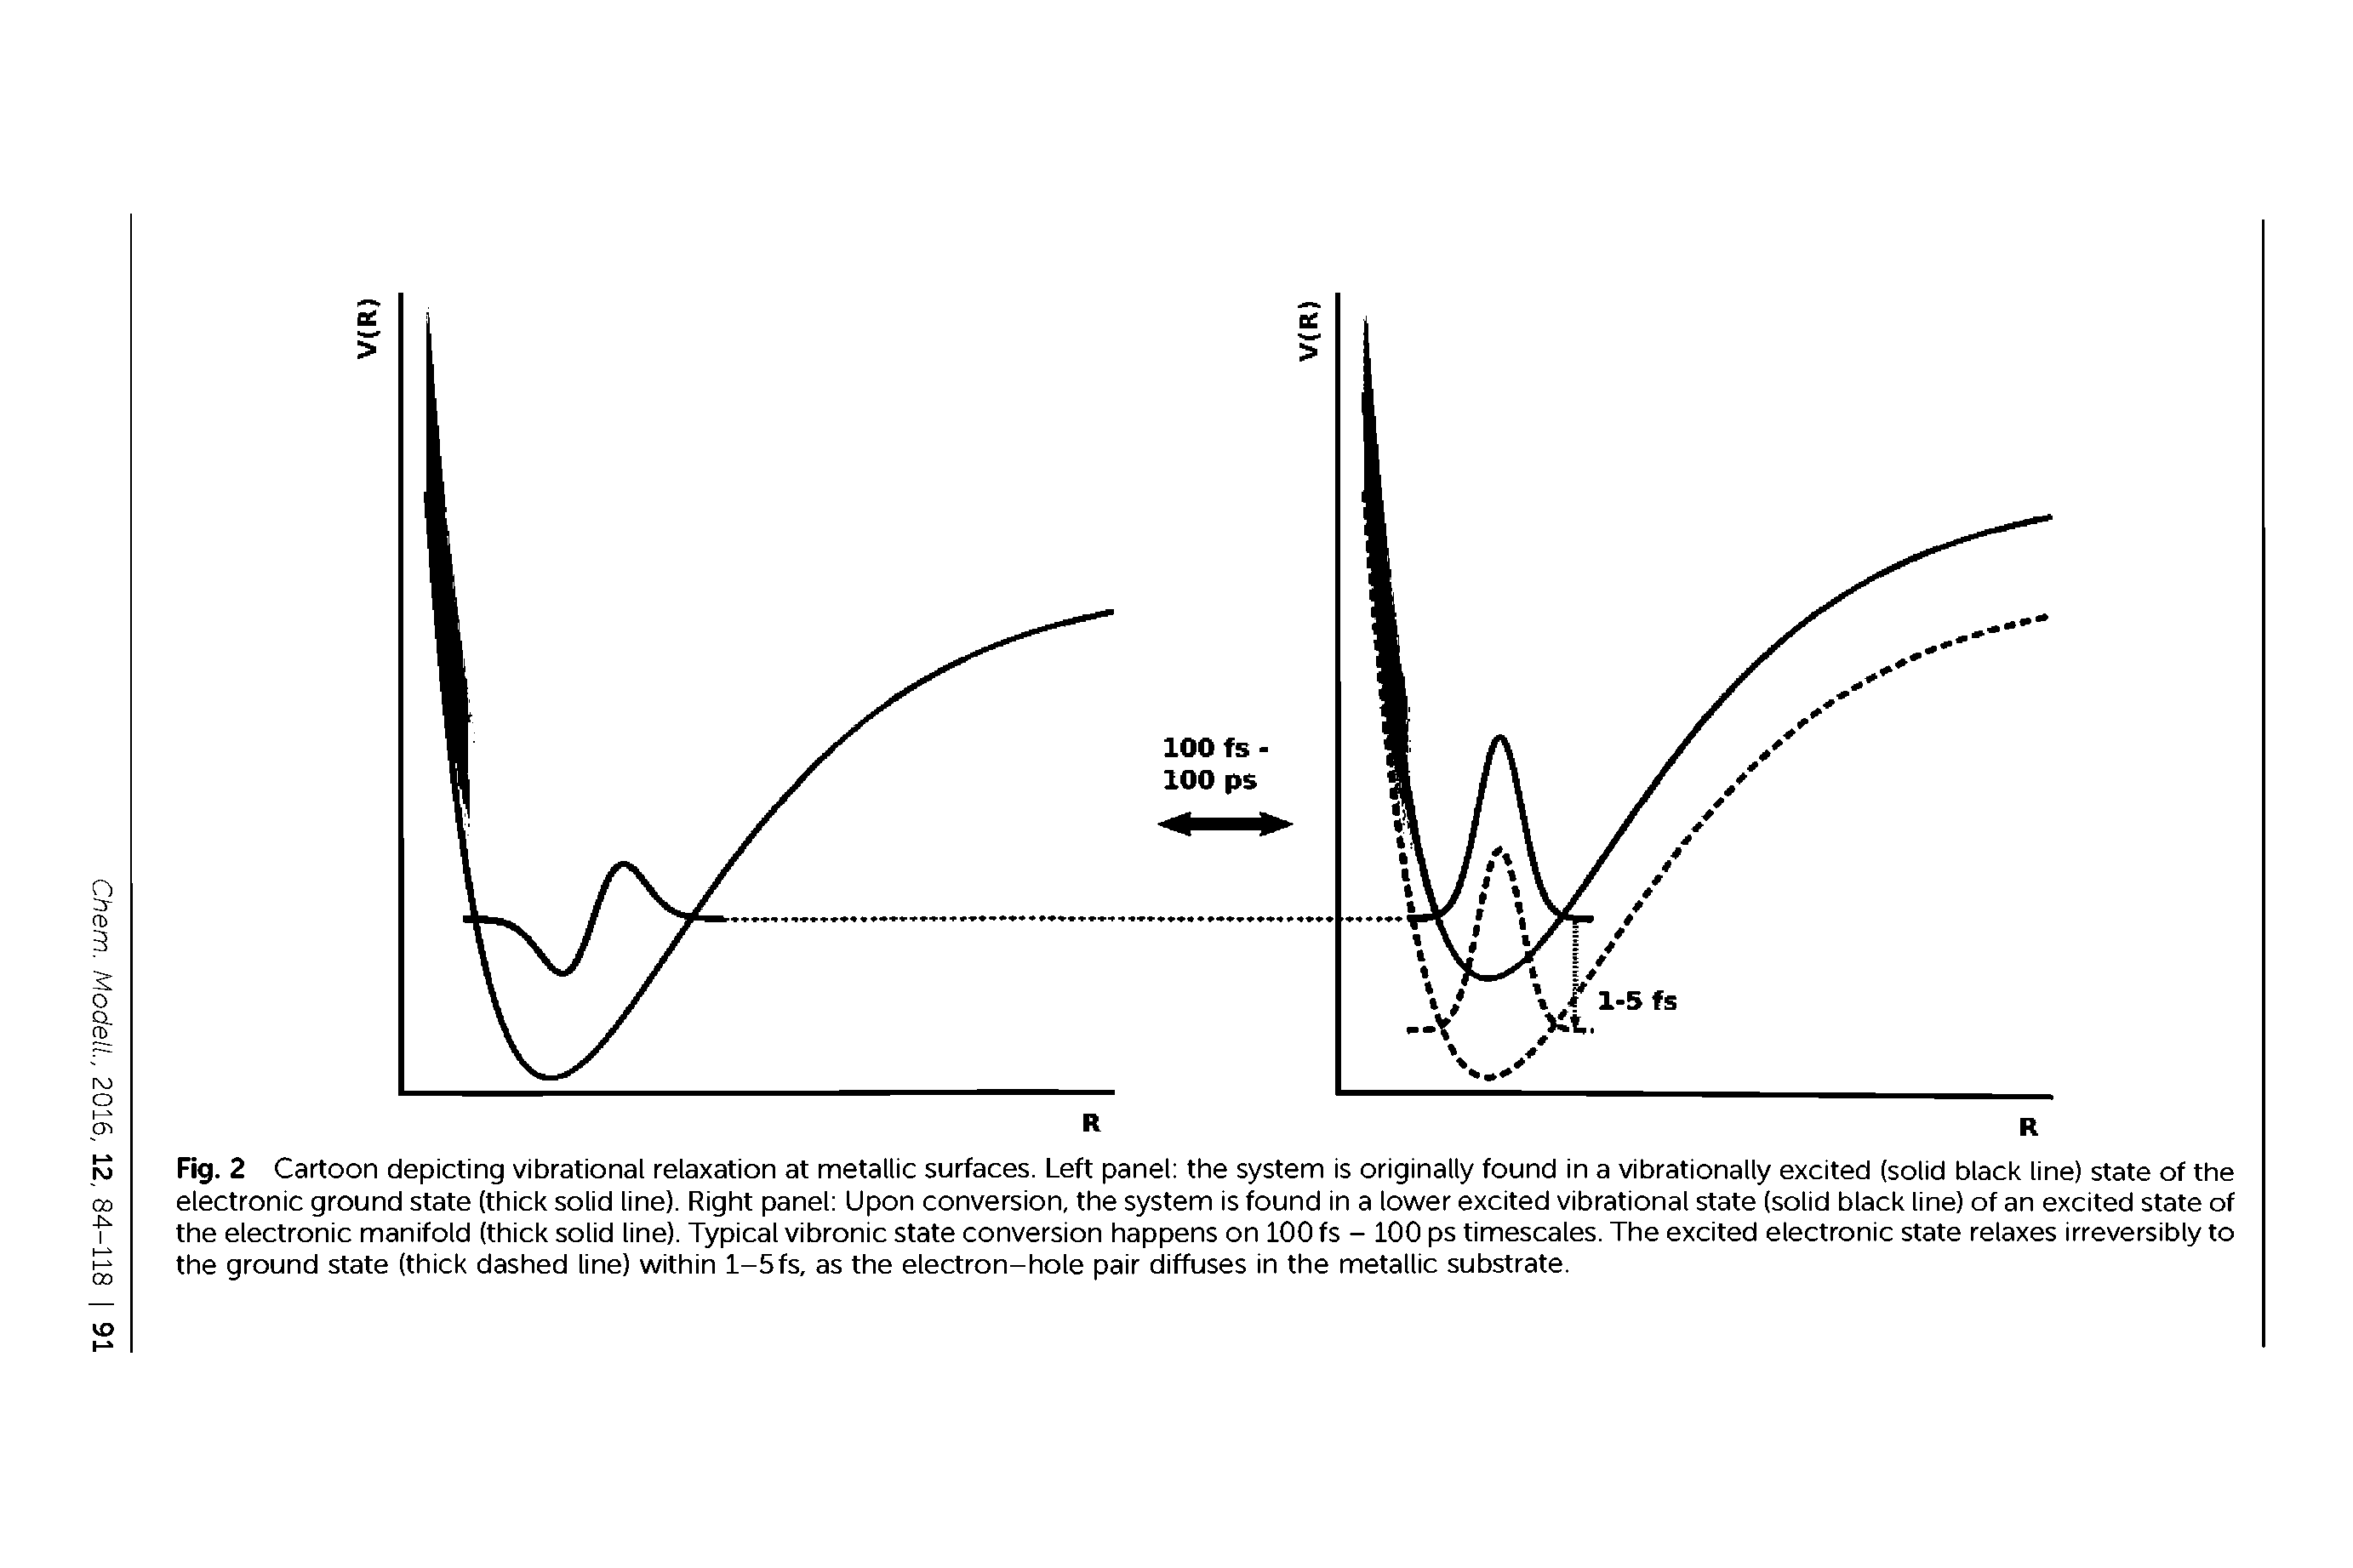 Fig. 2 Cartoon depicting vibrational relaxation at metallic surfaces. Left panel the system is originally found in a vibrationally excited (solid black line) state of the electronic ground state (thick solid line). Right panel Upon conversion, the system is found in a lower excited vibrational state (solid black line) of an excited state of the electronic manifold (thick solid line). Typical vibronic state conversion happens on 100 fs - 100 ps timescales. The excited electronic state relaxes irreversibly to the ground state (thick dashed line) within l-5fs, as the electron-hole pair diffuses in the metallic substrate.